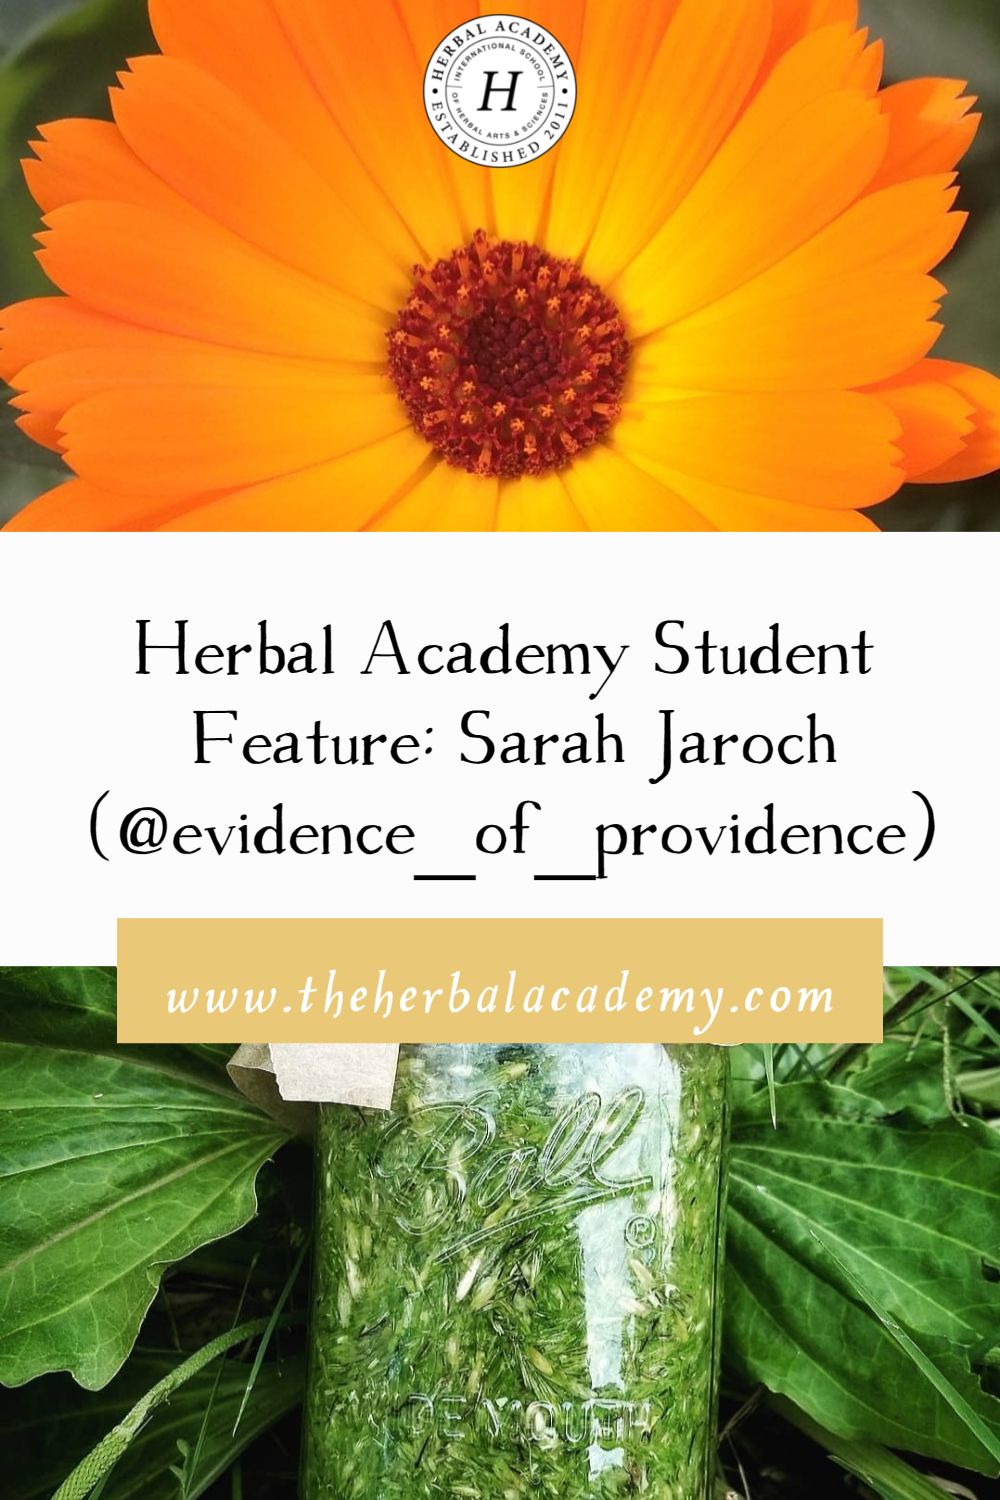 Herbal Academy Student Feature: Sarah Jaroch (@evidence_of_providence) | Herbal Academy | For this interview, we spoke with Sarah Jaroch, owner of Yarrow Creative Copy, where she works as a copywriter and marketer for herbalists.